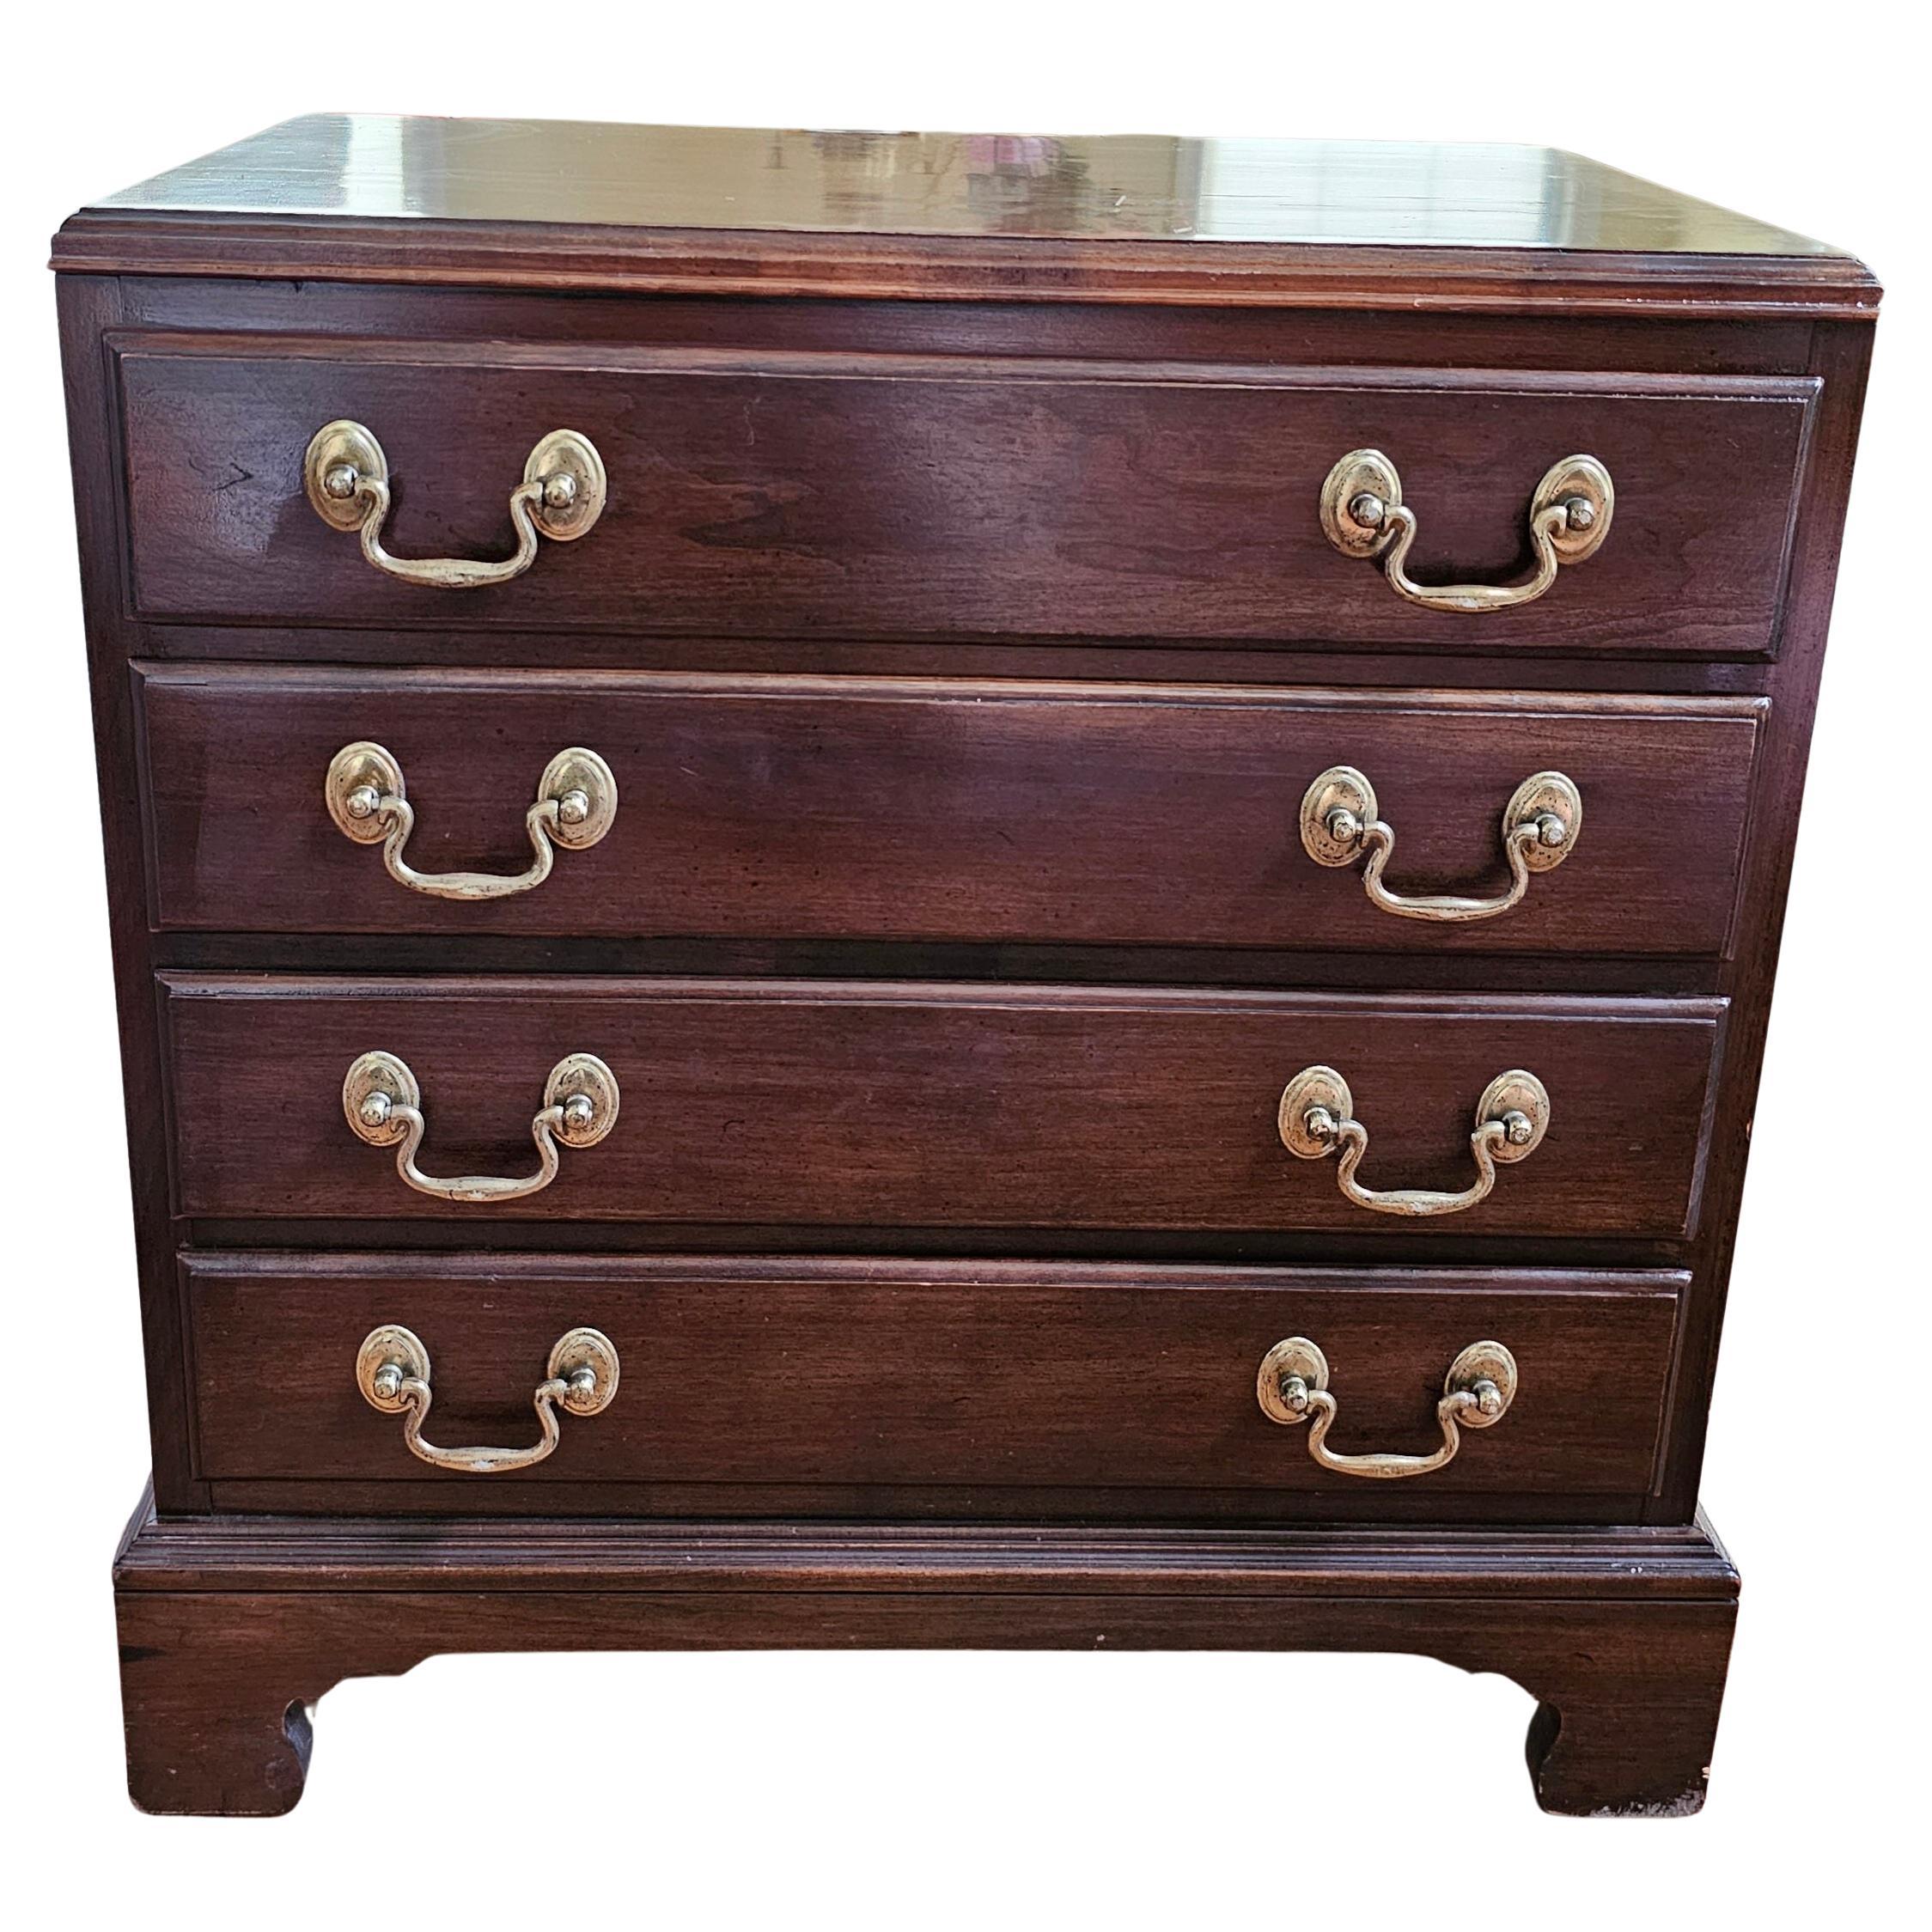 Pair of Chippendale solid Cherry Small Chest of Drawers or Nightstands fully finished to the back. Measure 21